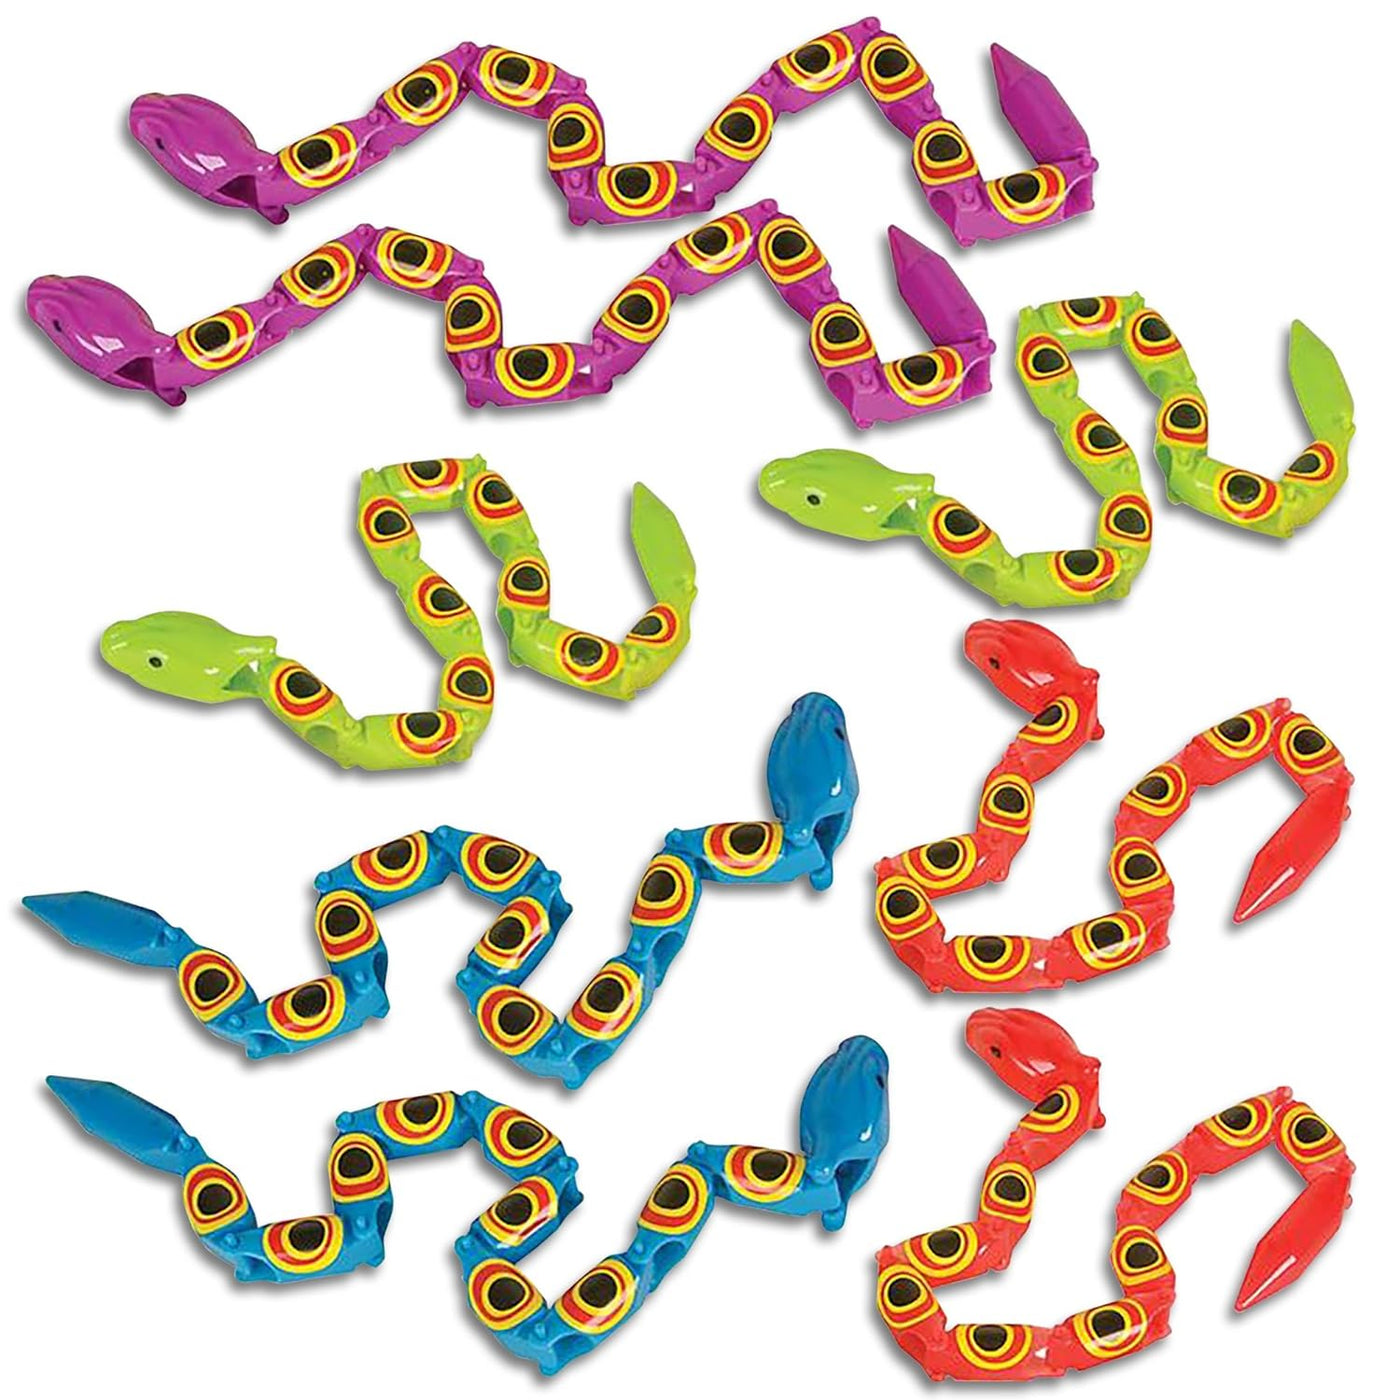 Jointed Snake Toys Set of 12 - 15 Inch